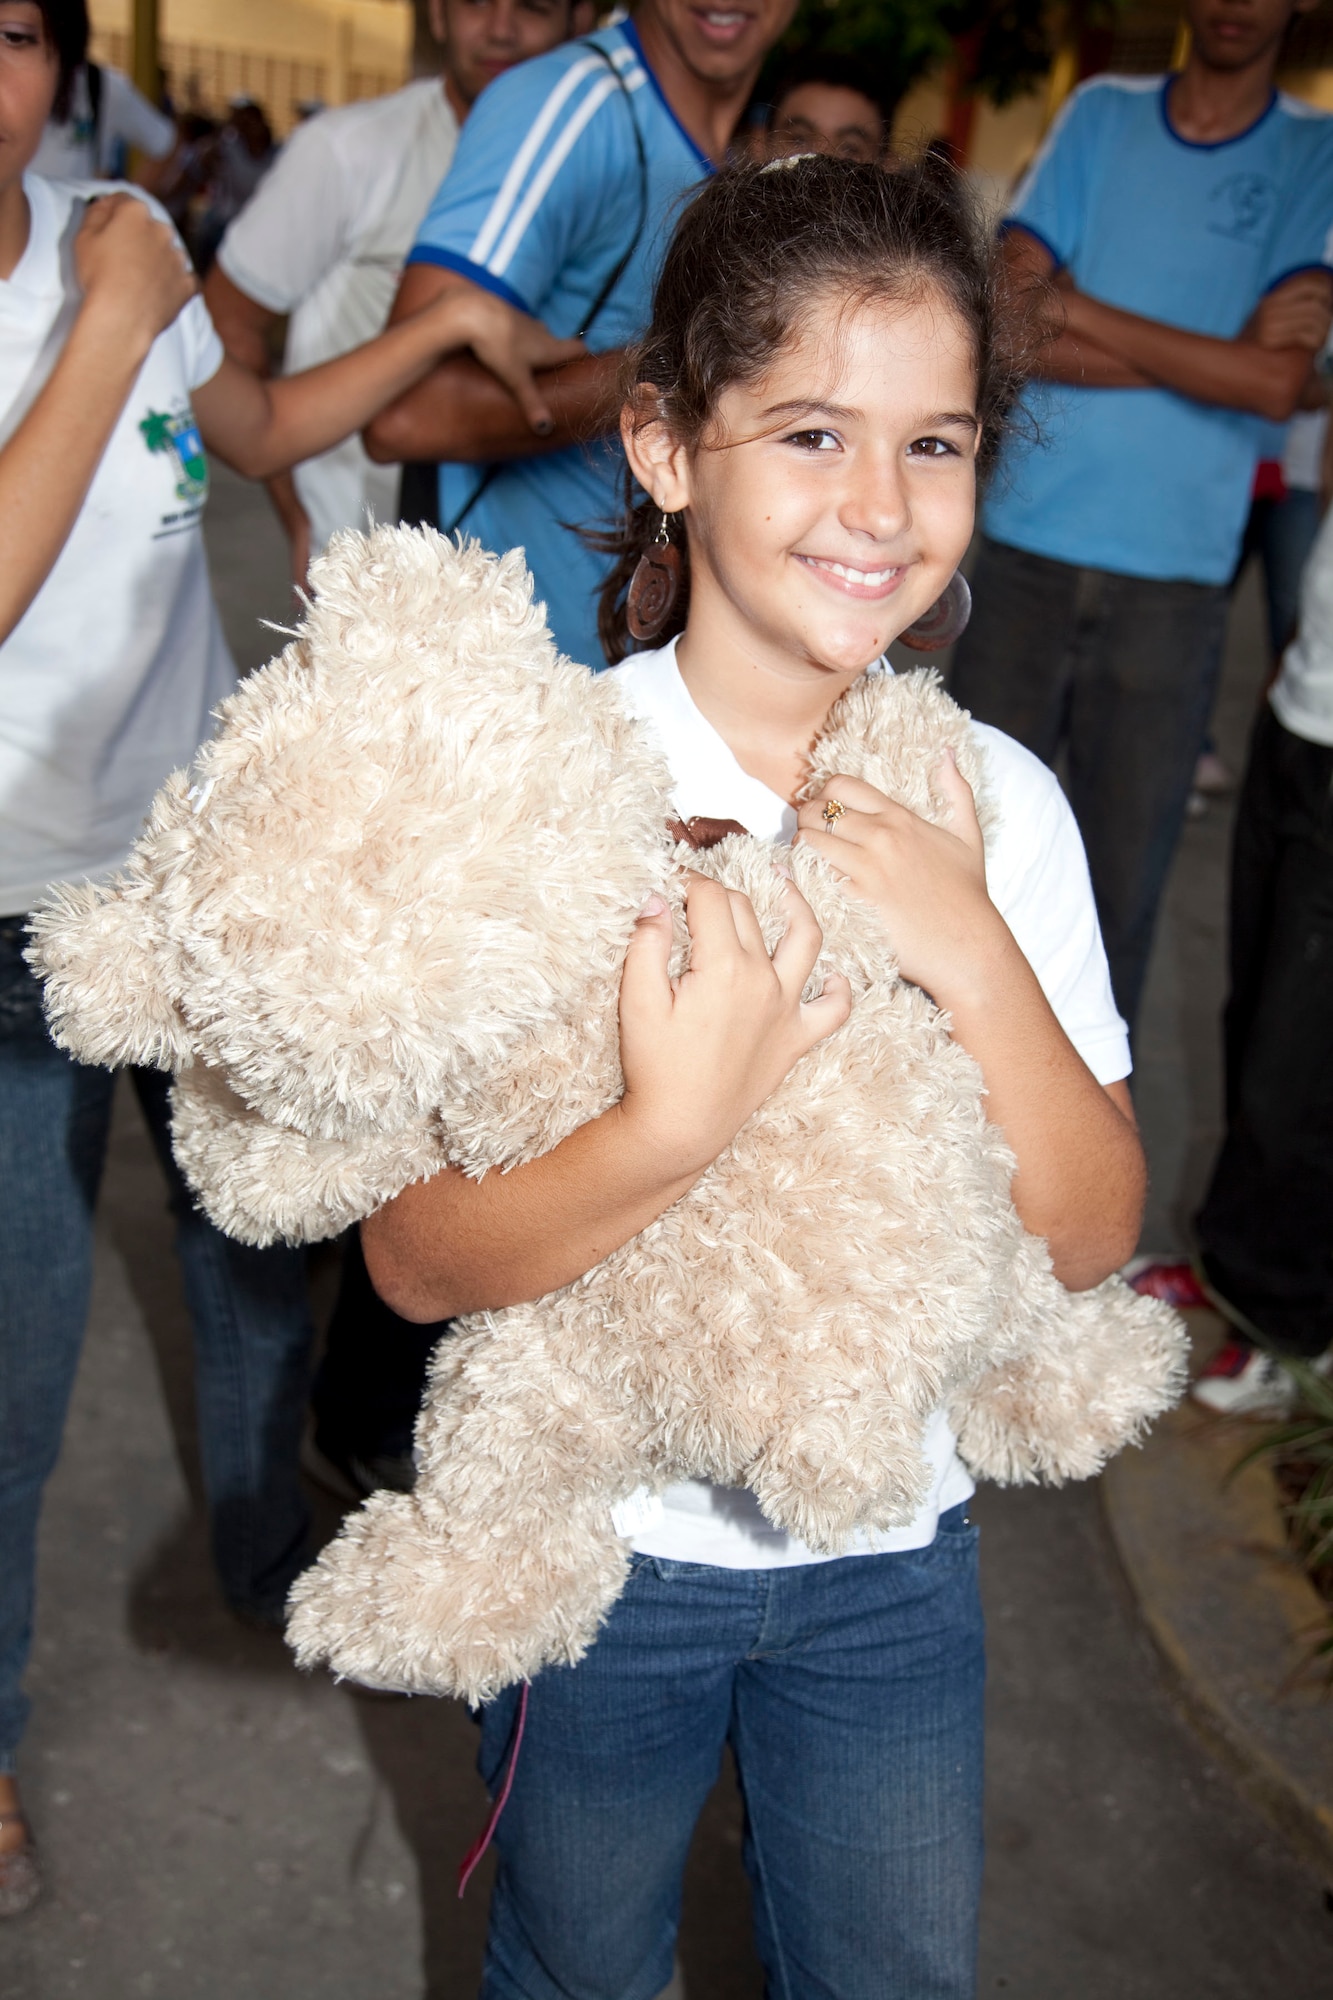 A local student hugs a stuffed bear she was given by a U.S. Airforce airmen.A group of more than 15 airmen visited the local school of Eliah Maia do Rego, Natal Brazil, building community relations during CRUZEX V. During the visit the airmen interacted with the students on an informal basis; distributed small gifts and took group pictures. CRUZEX V, or Cruzeiro Do Sul (Southern Cross), is a multi-national combined exercise involving the Air Forces of Argentina, Brazil, Chile, France and Uruguay, , and observers from numerous other countries with more than 82 aircraft and almost 3,000 Airmen involved. (U.S. Air Force photo/Staff Sgt. Michael Matkin)